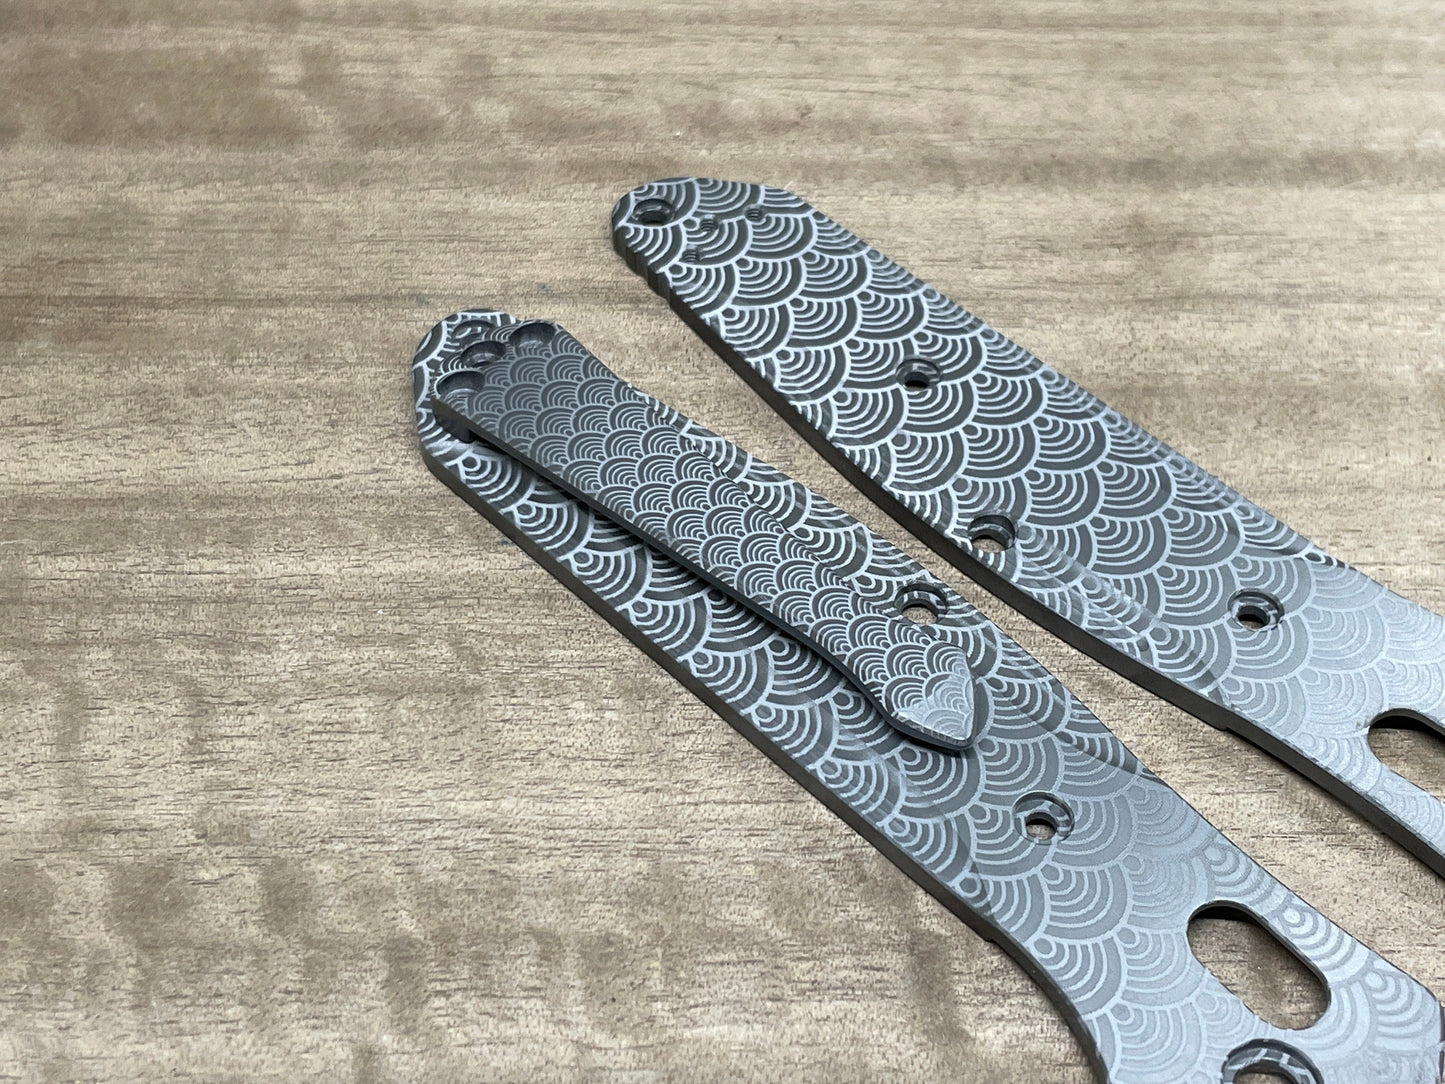 SEIGAIHA engraved Black Zirconium SPIDY CLIP for most Benchmade models